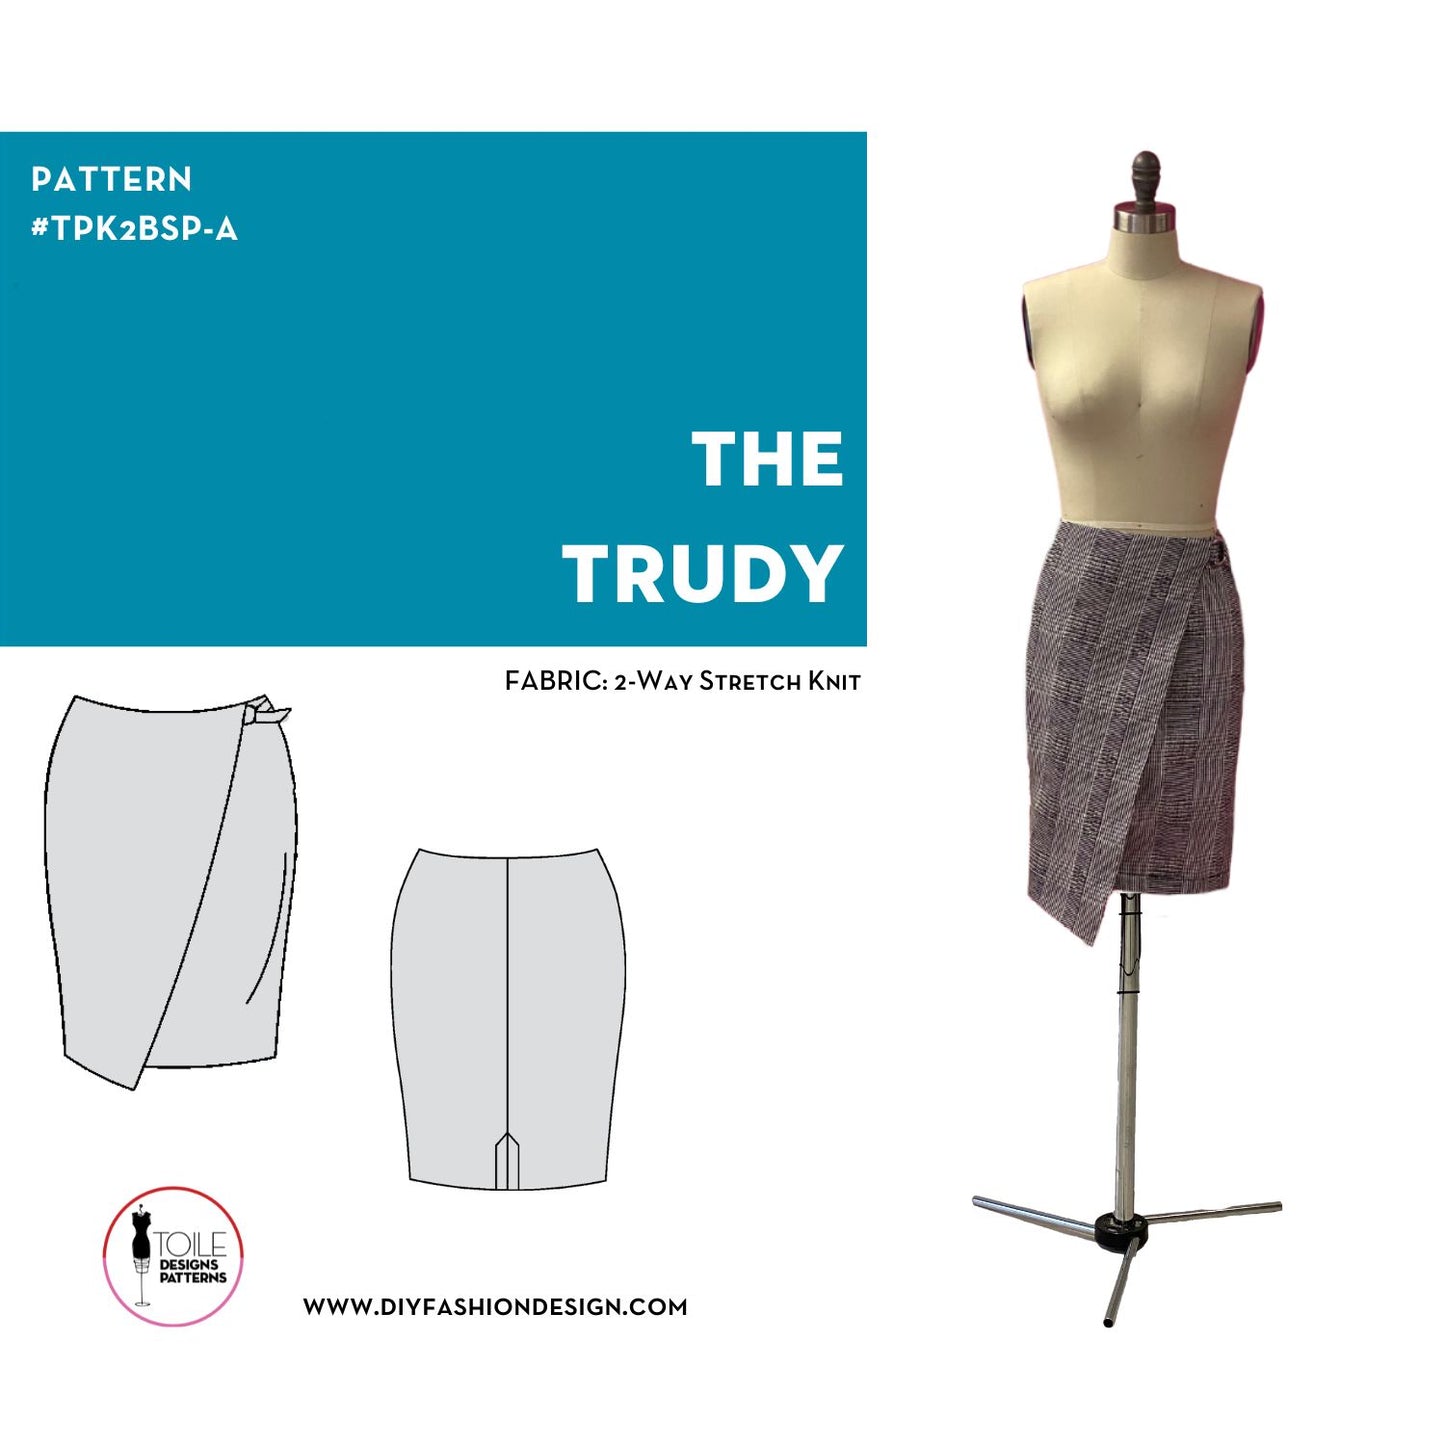 The Trudy